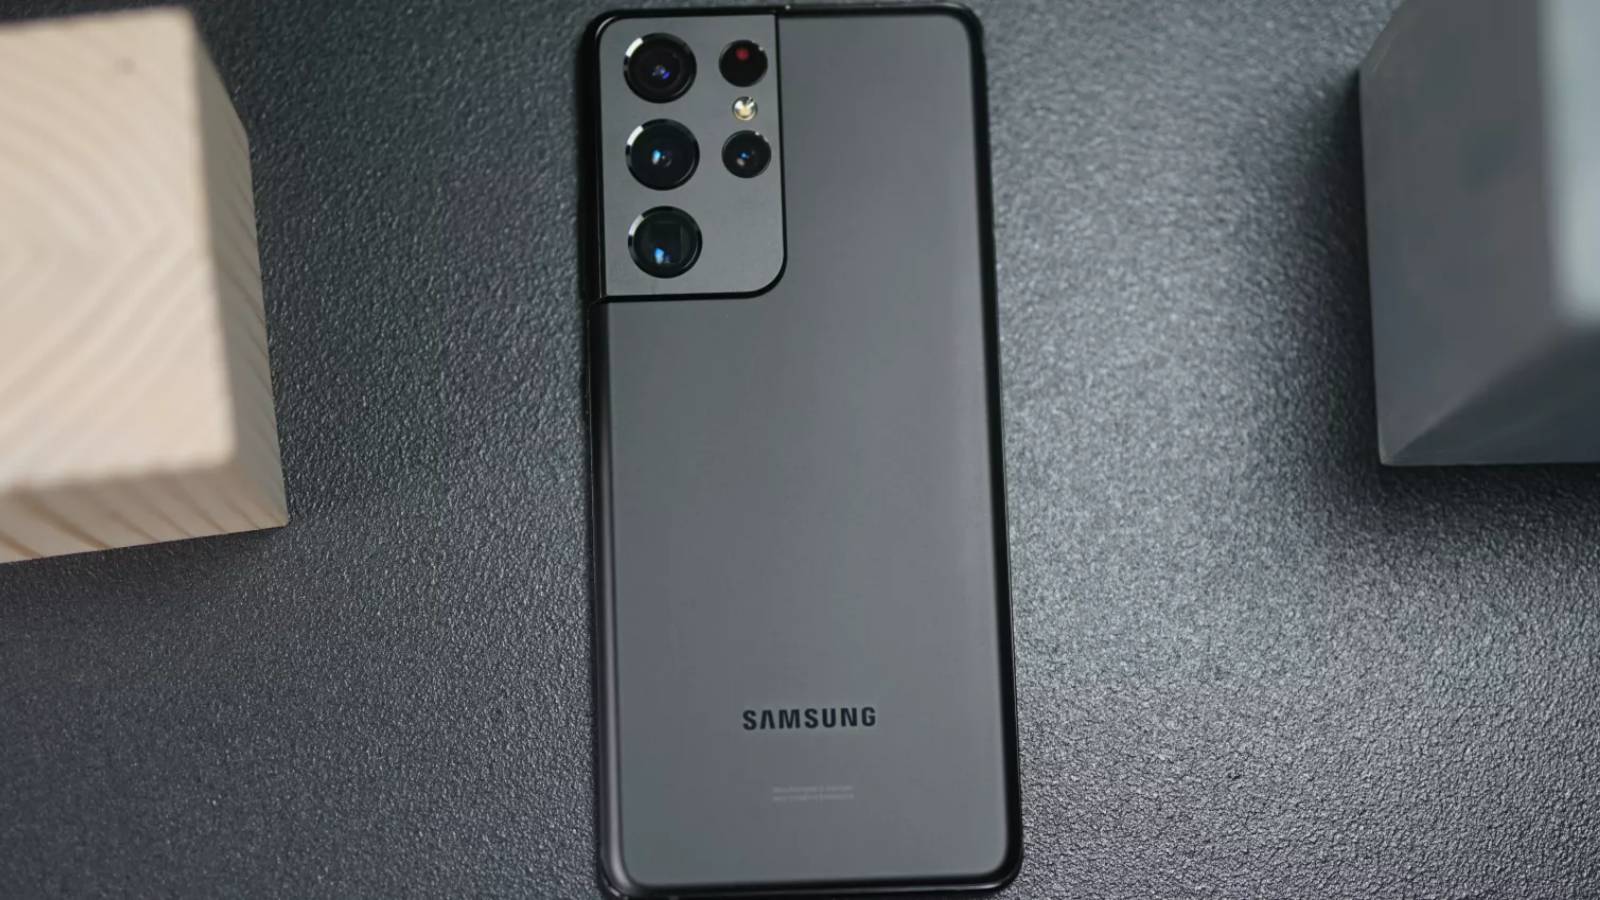 Samsung GALAXY S21 eMAG grosses réductions